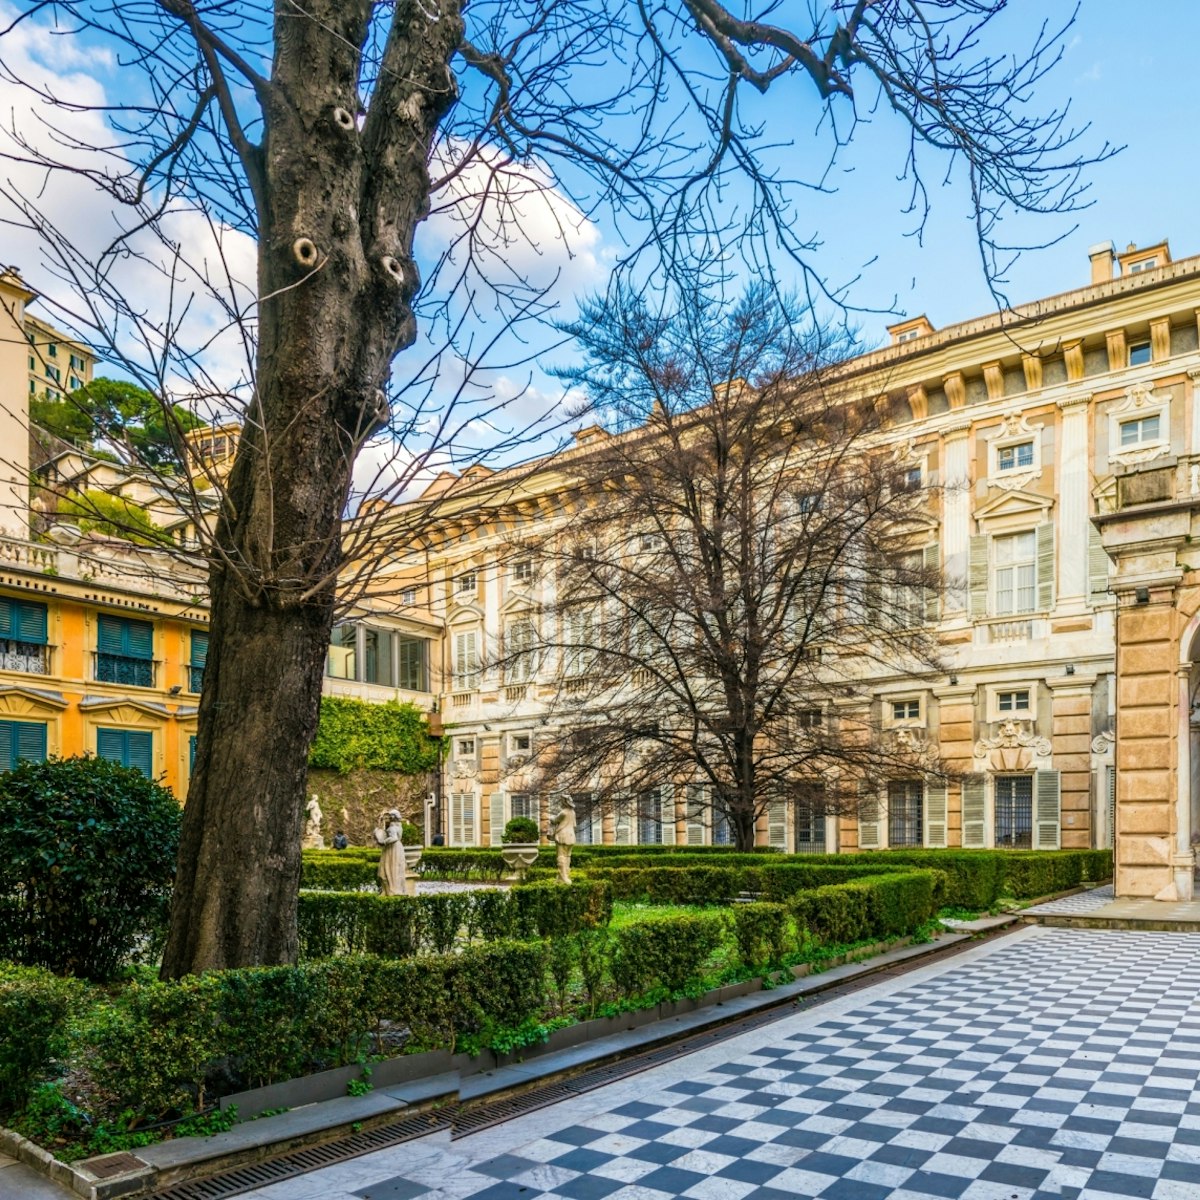 GENOA, ITALY, MARCH 13, 2016: View of a garden situated between palazzo bianco and palazzo doria tursi palace in Genoa, Italy; Shutterstock ID 483815368; Your name (First / Last): Anna Tyler; GL account no.: 65050; Netsuite department name: Online Editorial; Full Product or Project name including edition: destination-image-southern-europe